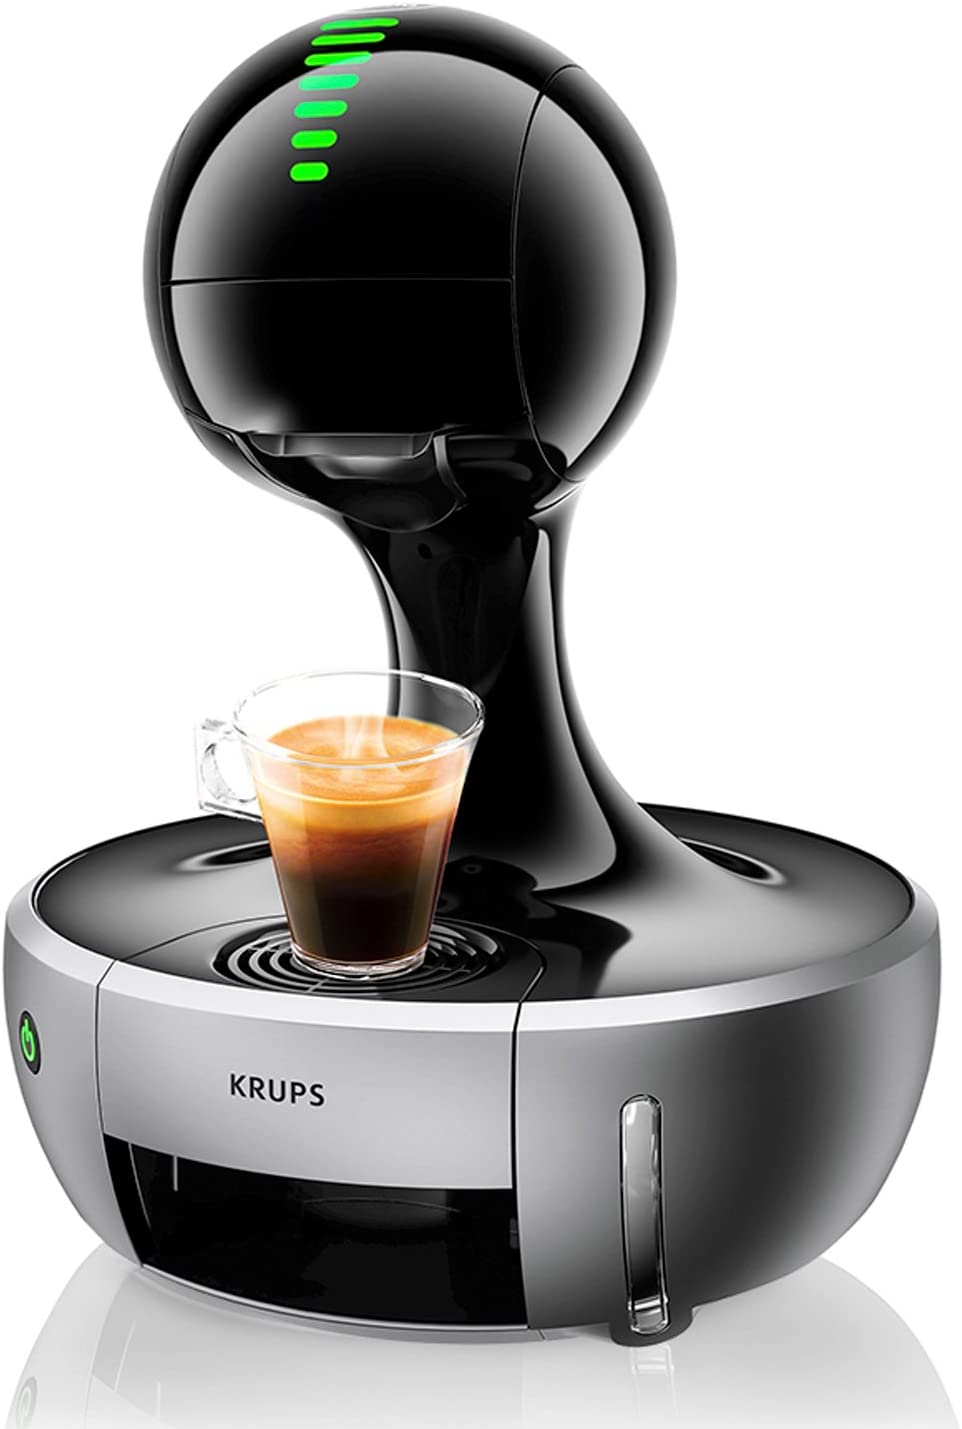 Krups Dolce Gusto Krups Nescafé Dolce Gusto Drop KP350B capsule coffee machine (for hot and cold drinks, 15 bar pump pressure, automatic water metering, flow stop, sensor touch, 0.8 l water tank) silver